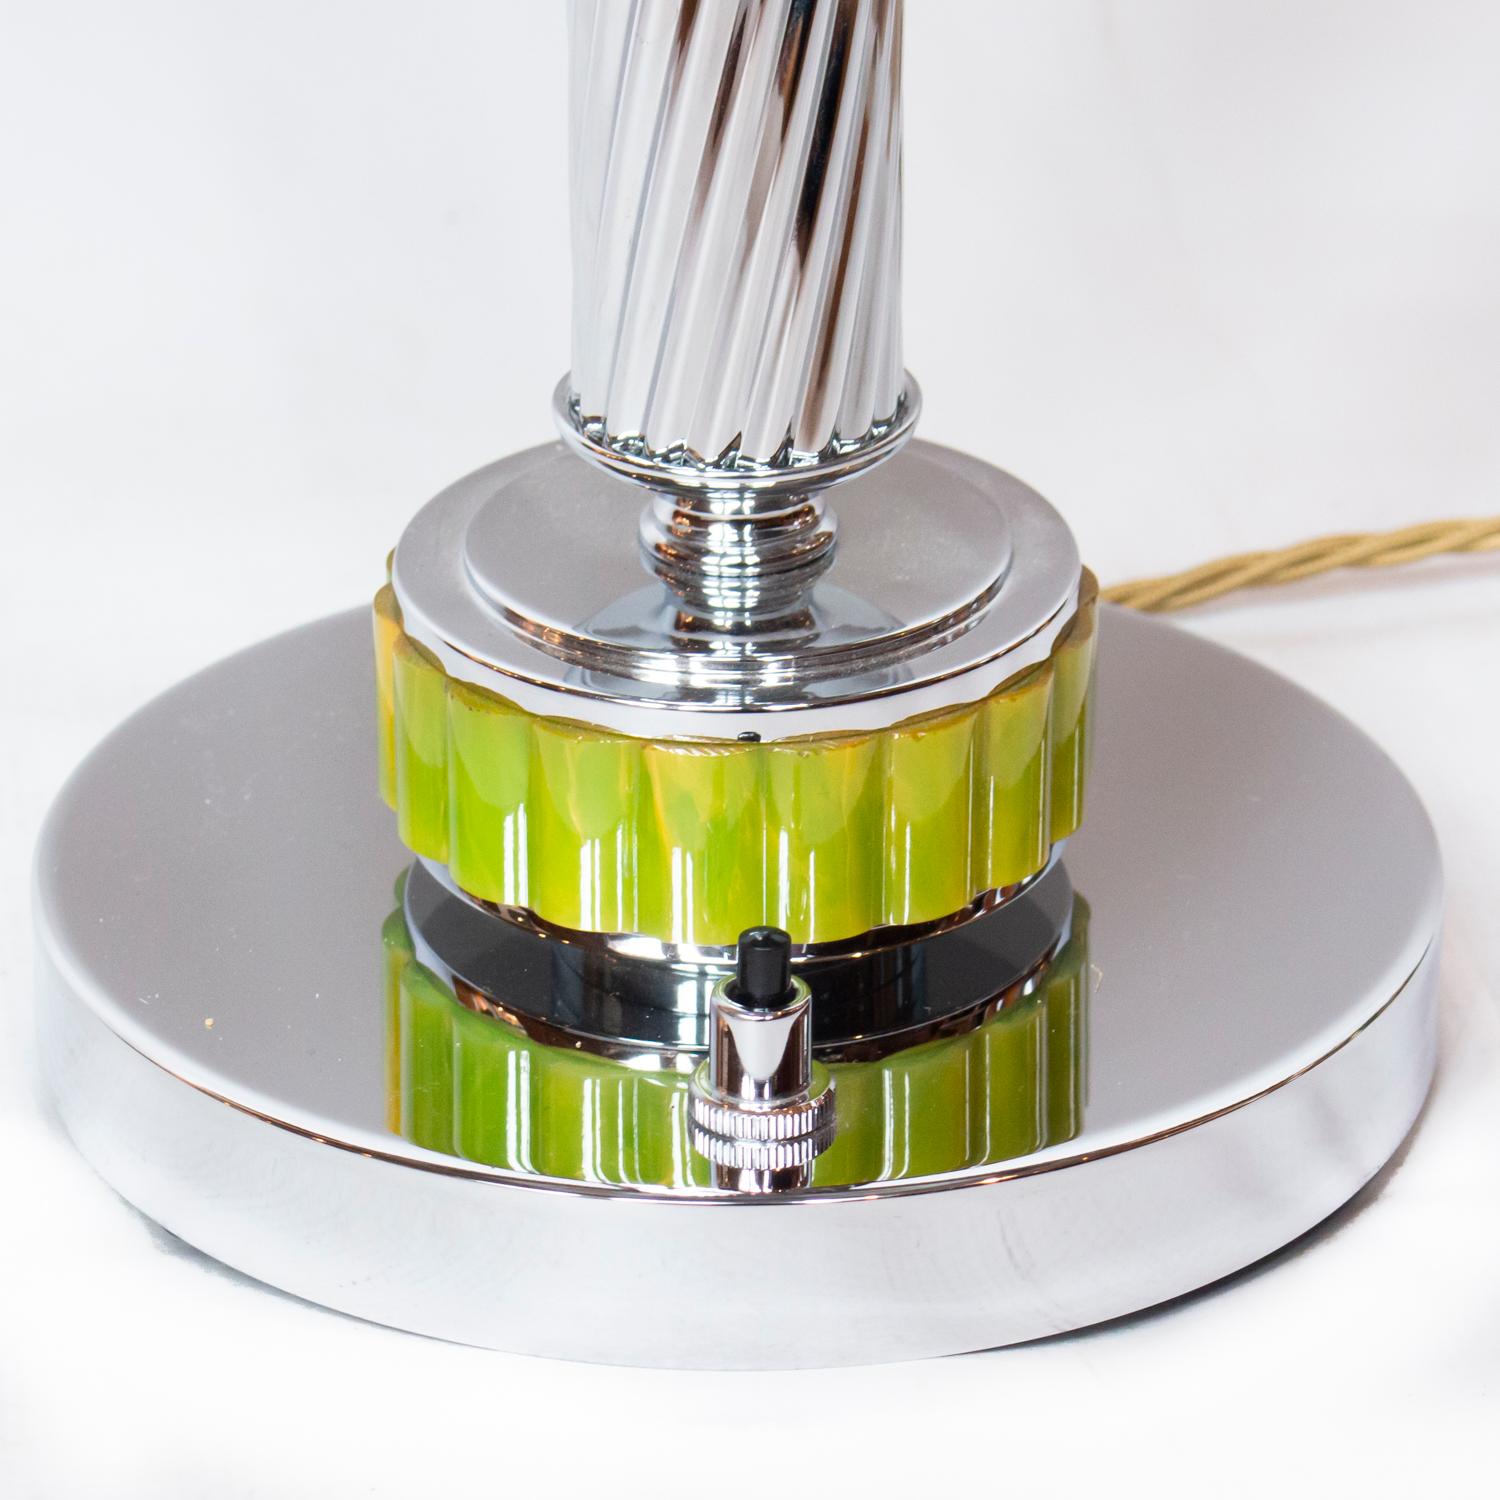 A pair of Art Deco dome lamps with chrome domed shades. Bevelled chromed metal stem with reeded green bakelite section between chrome base. Marbled green bakelite finial to top.

Dimensions: H 50cm W of shade 36cm W of base 15cm

Origin: